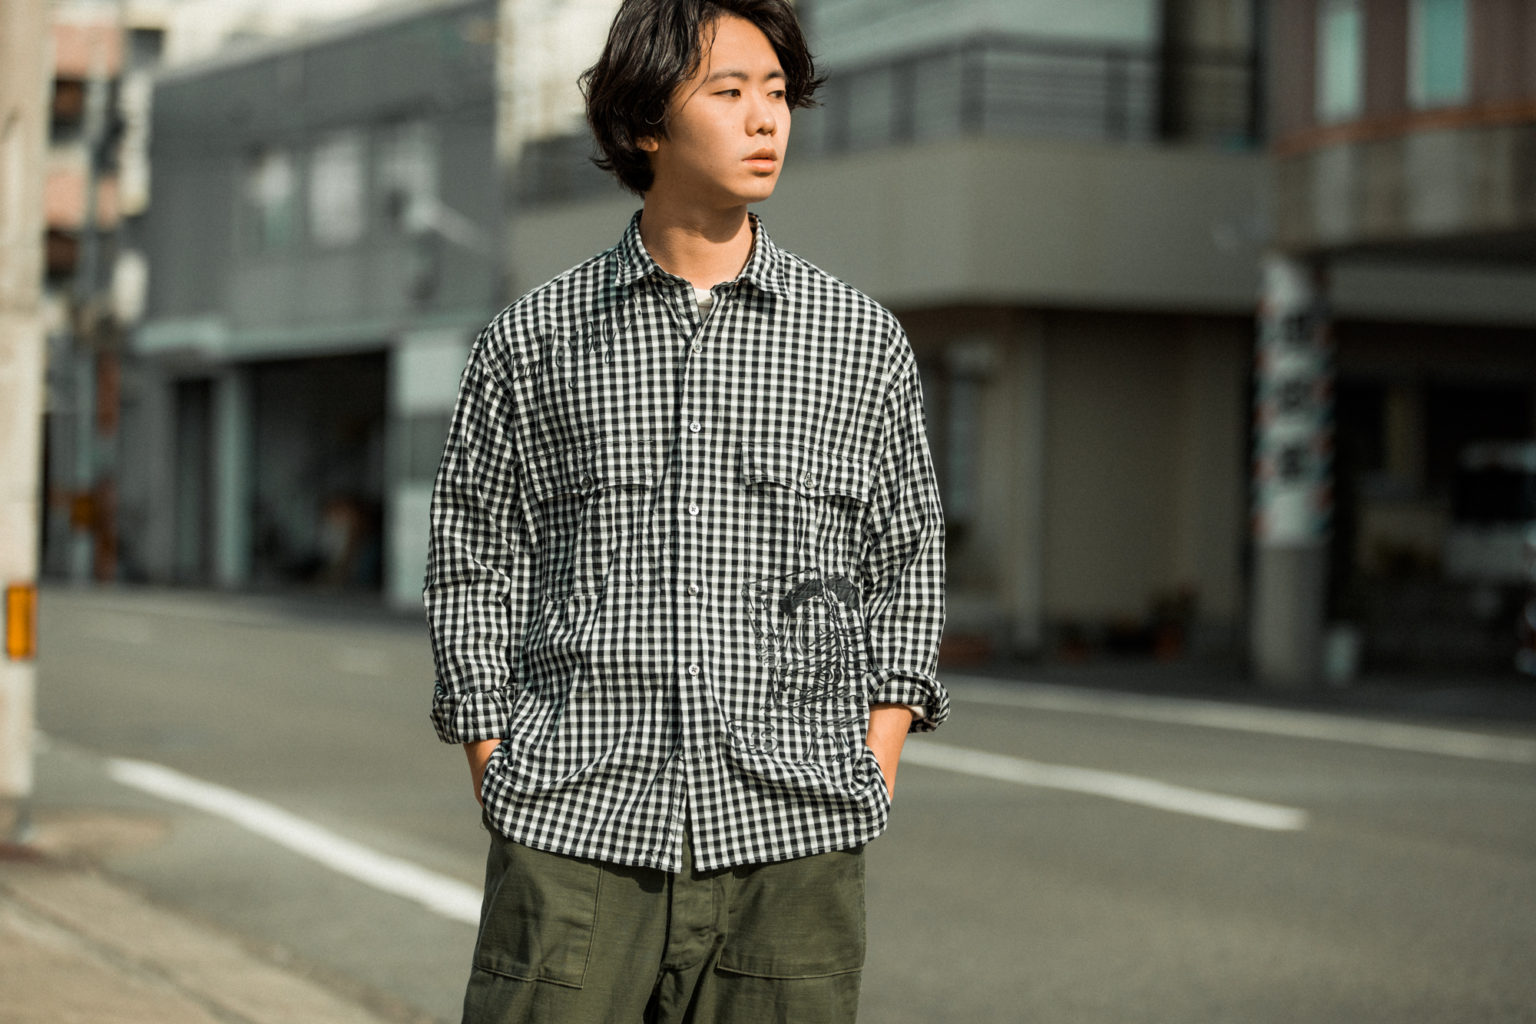 【PORTER CLASSIC】迷ったらコレ！-ROLL UP GINGHAM CHECK SHIRT “BEAT LOVE” LIMITED